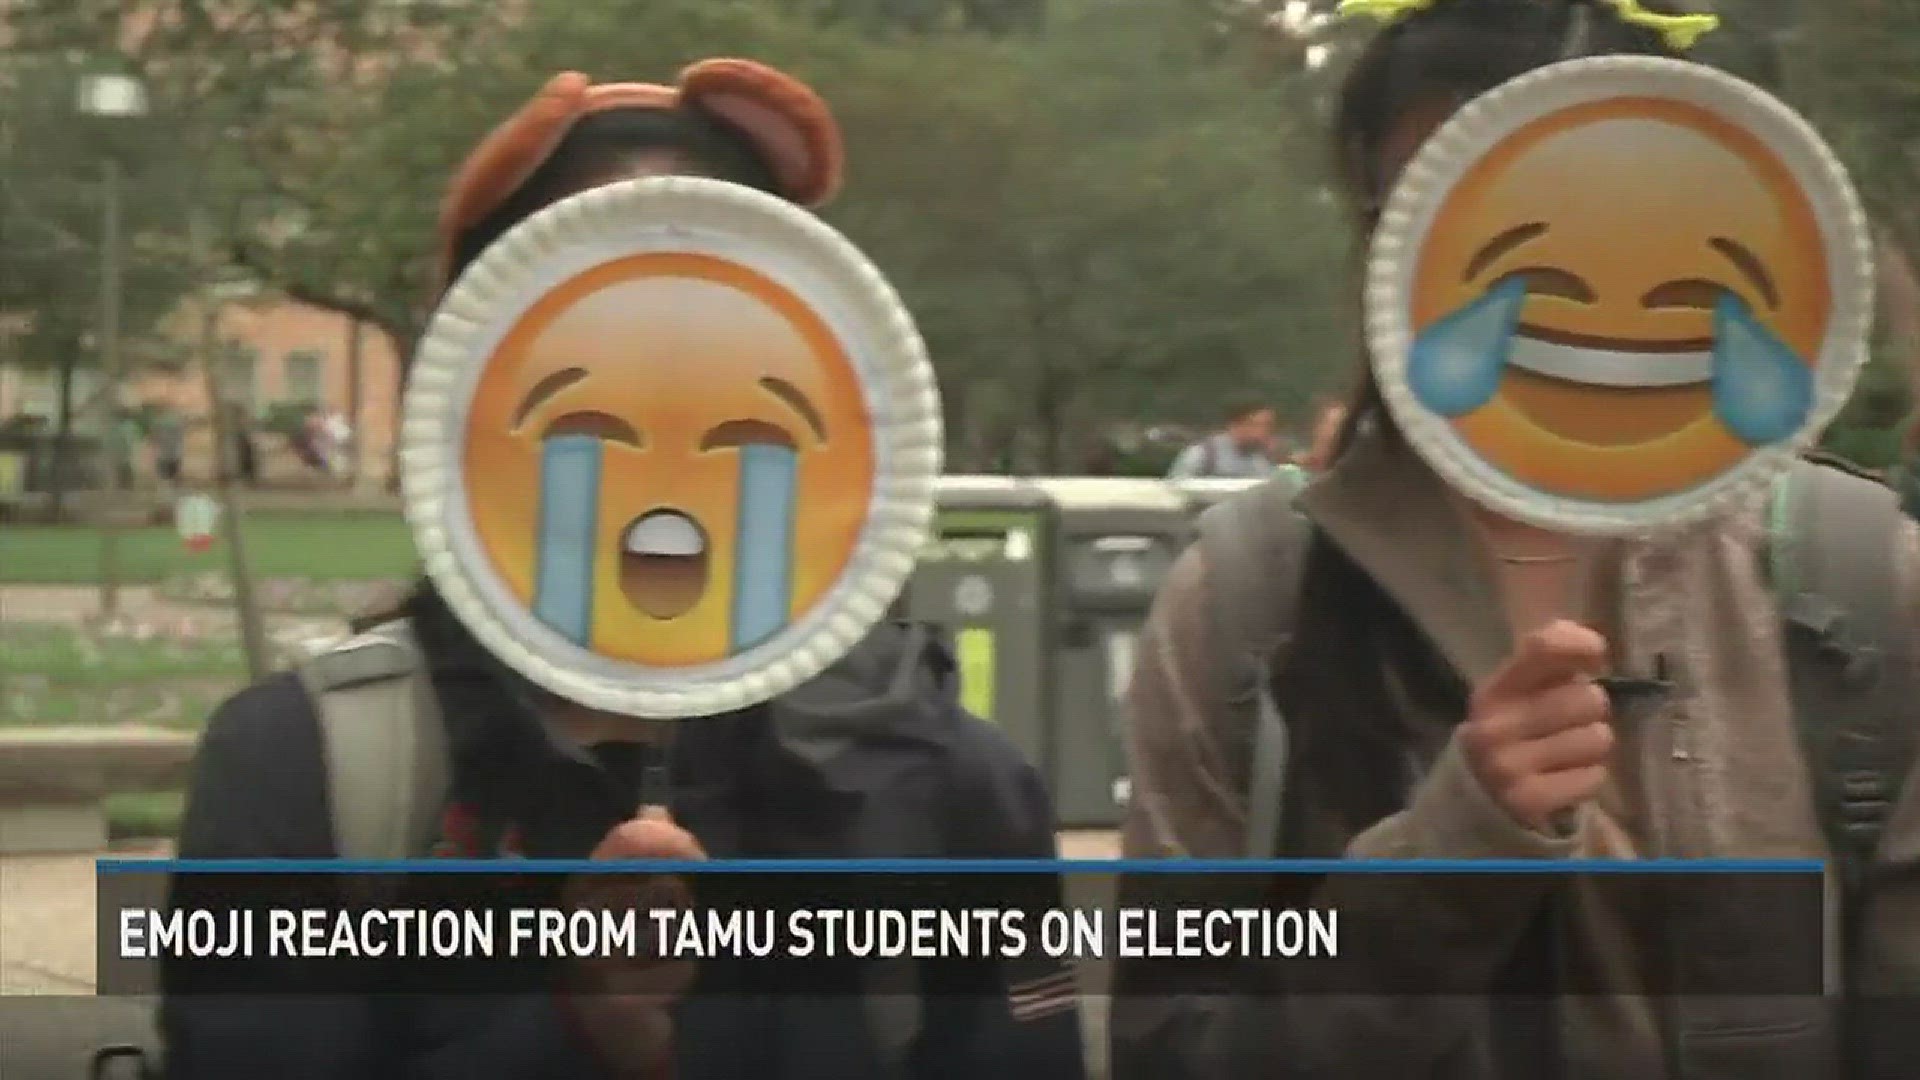 Students at Texas A&M tell us how they are feeling after the election.